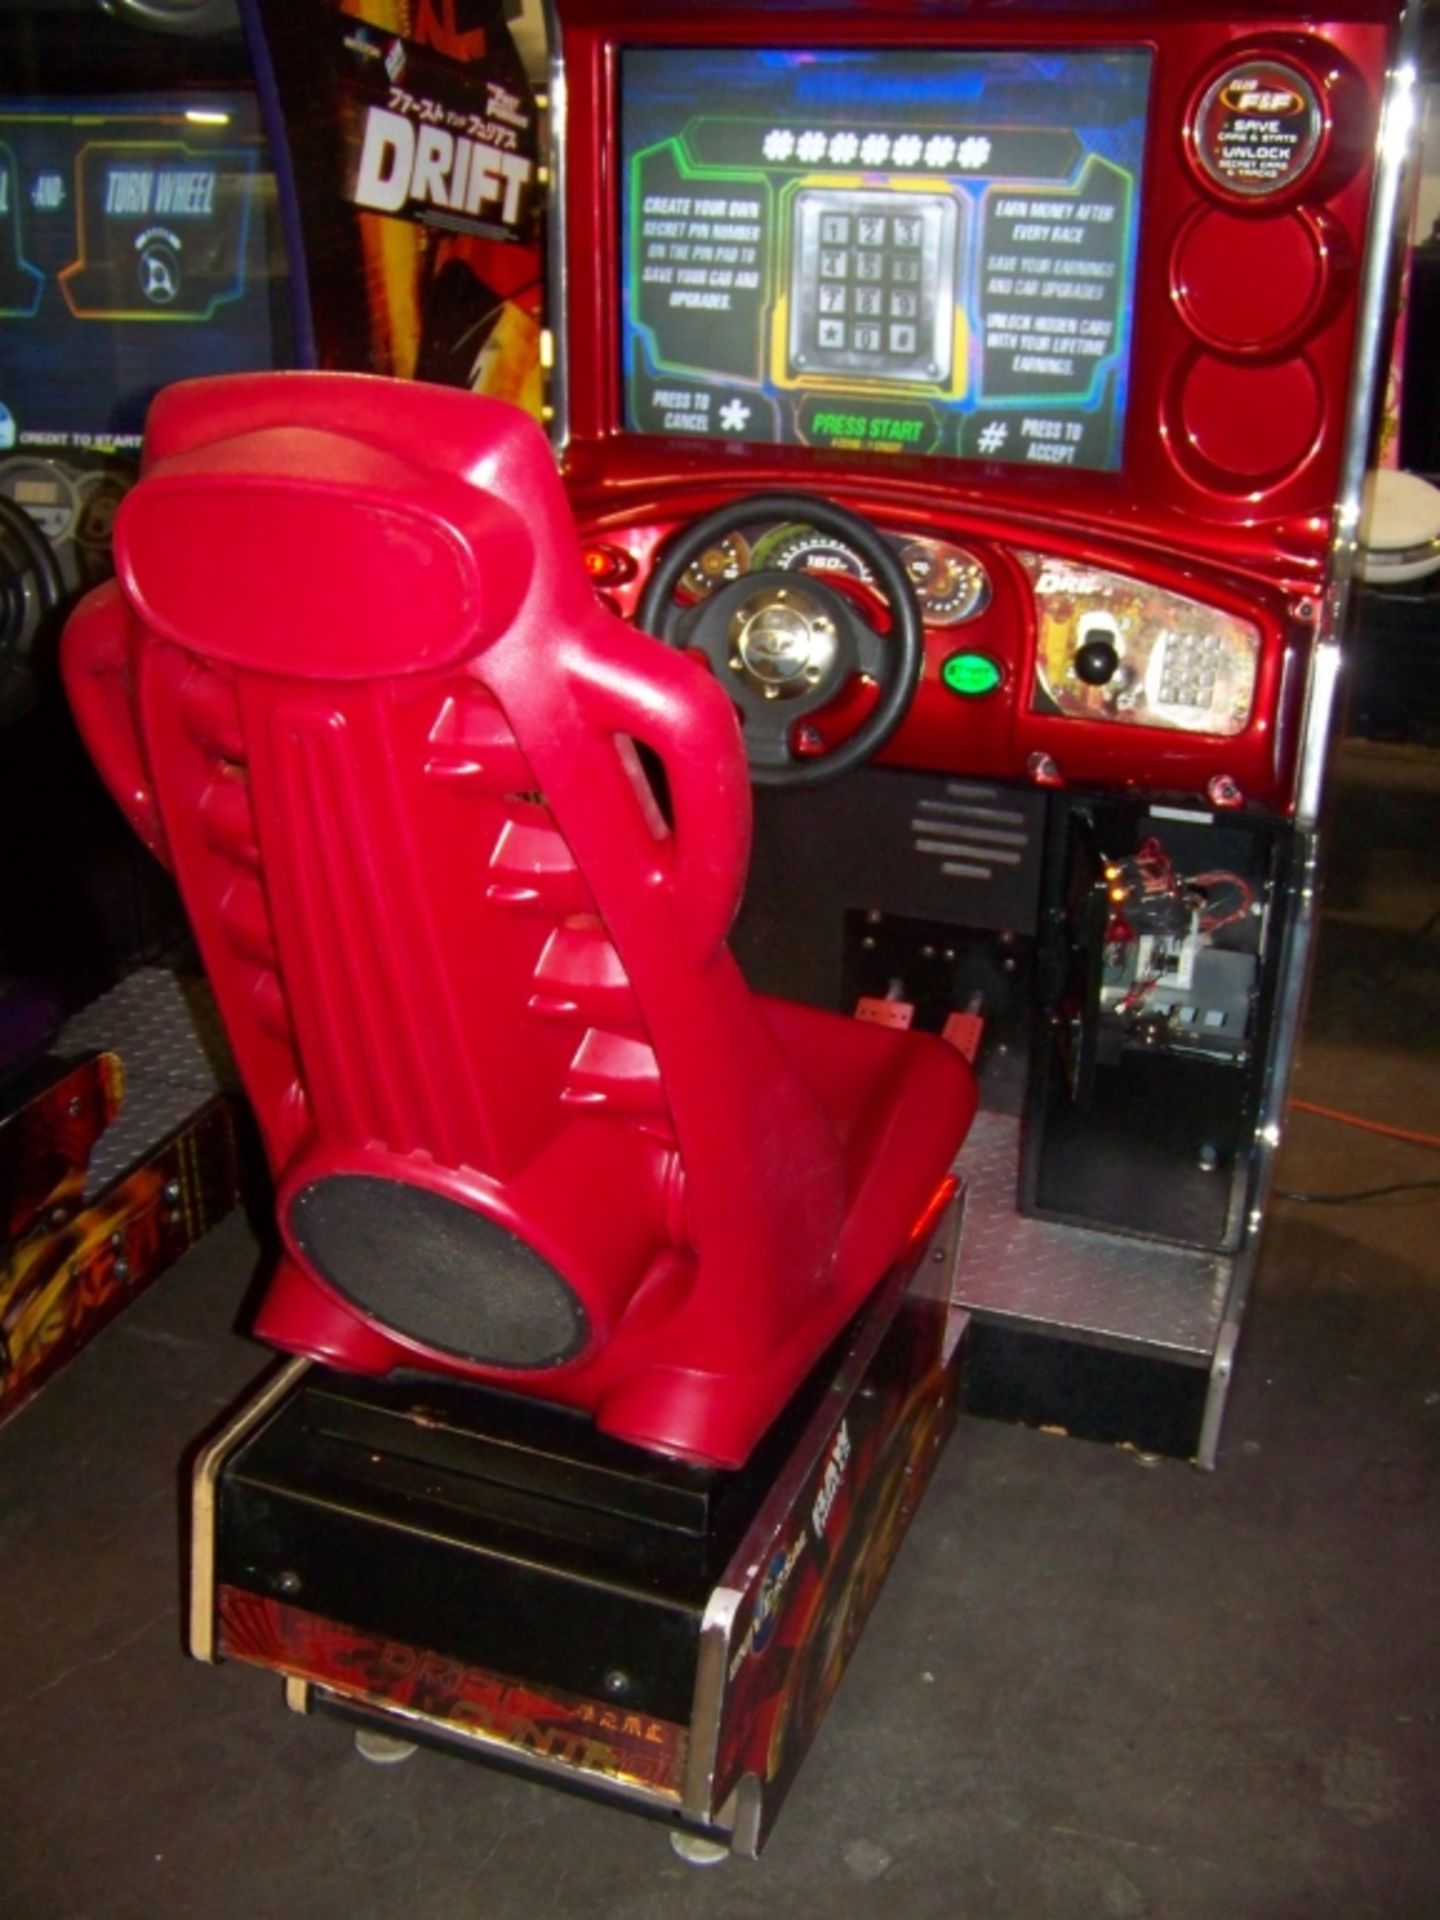 DRIFT FAST & FURIOUS DEDICATED RED CAB ARCADE - Image 3 of 7